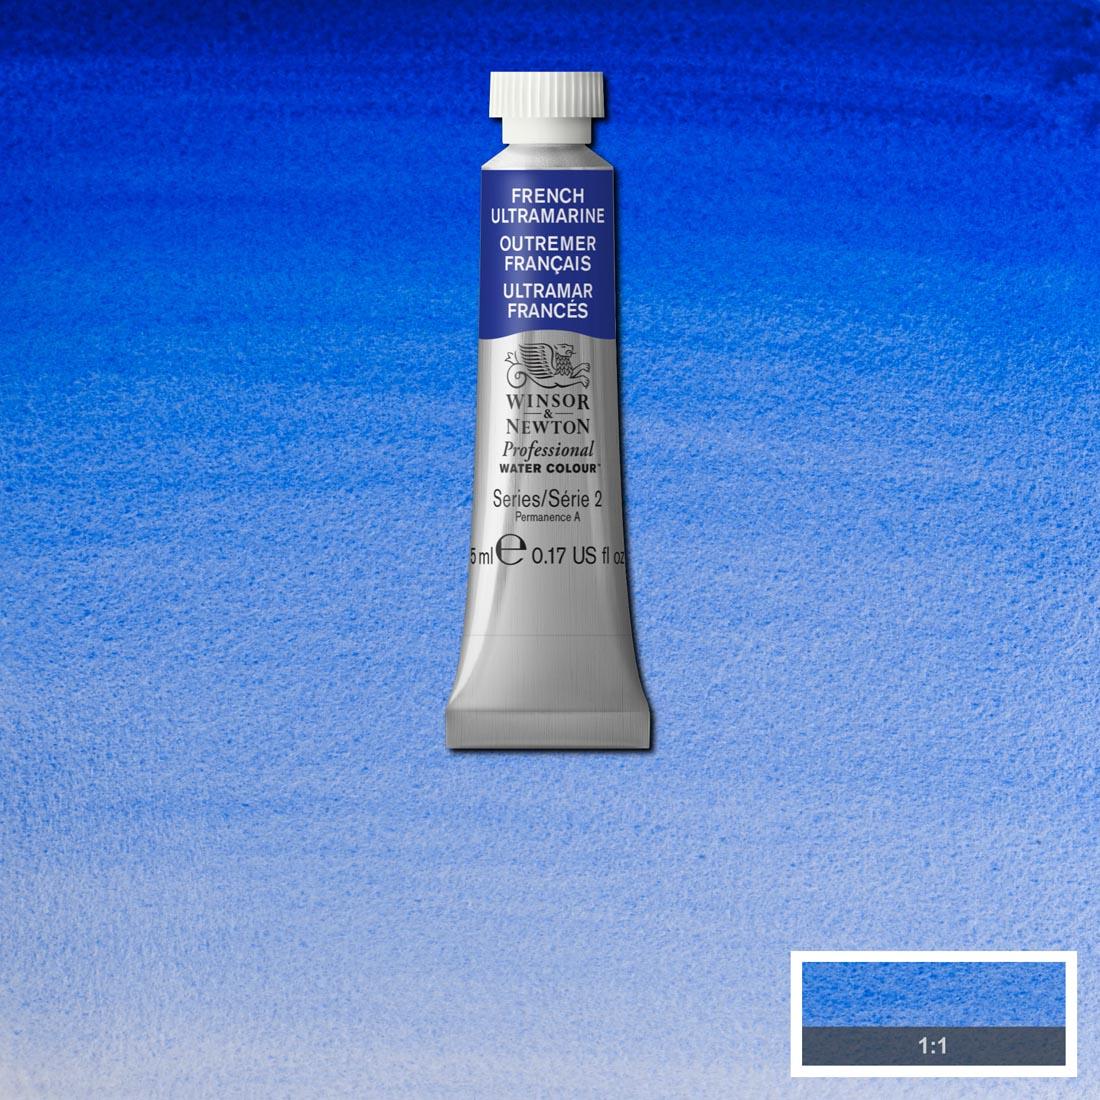 Tube of French Ultramarine Winsor & Newton Professional Water Colour with a paint swatch for the background